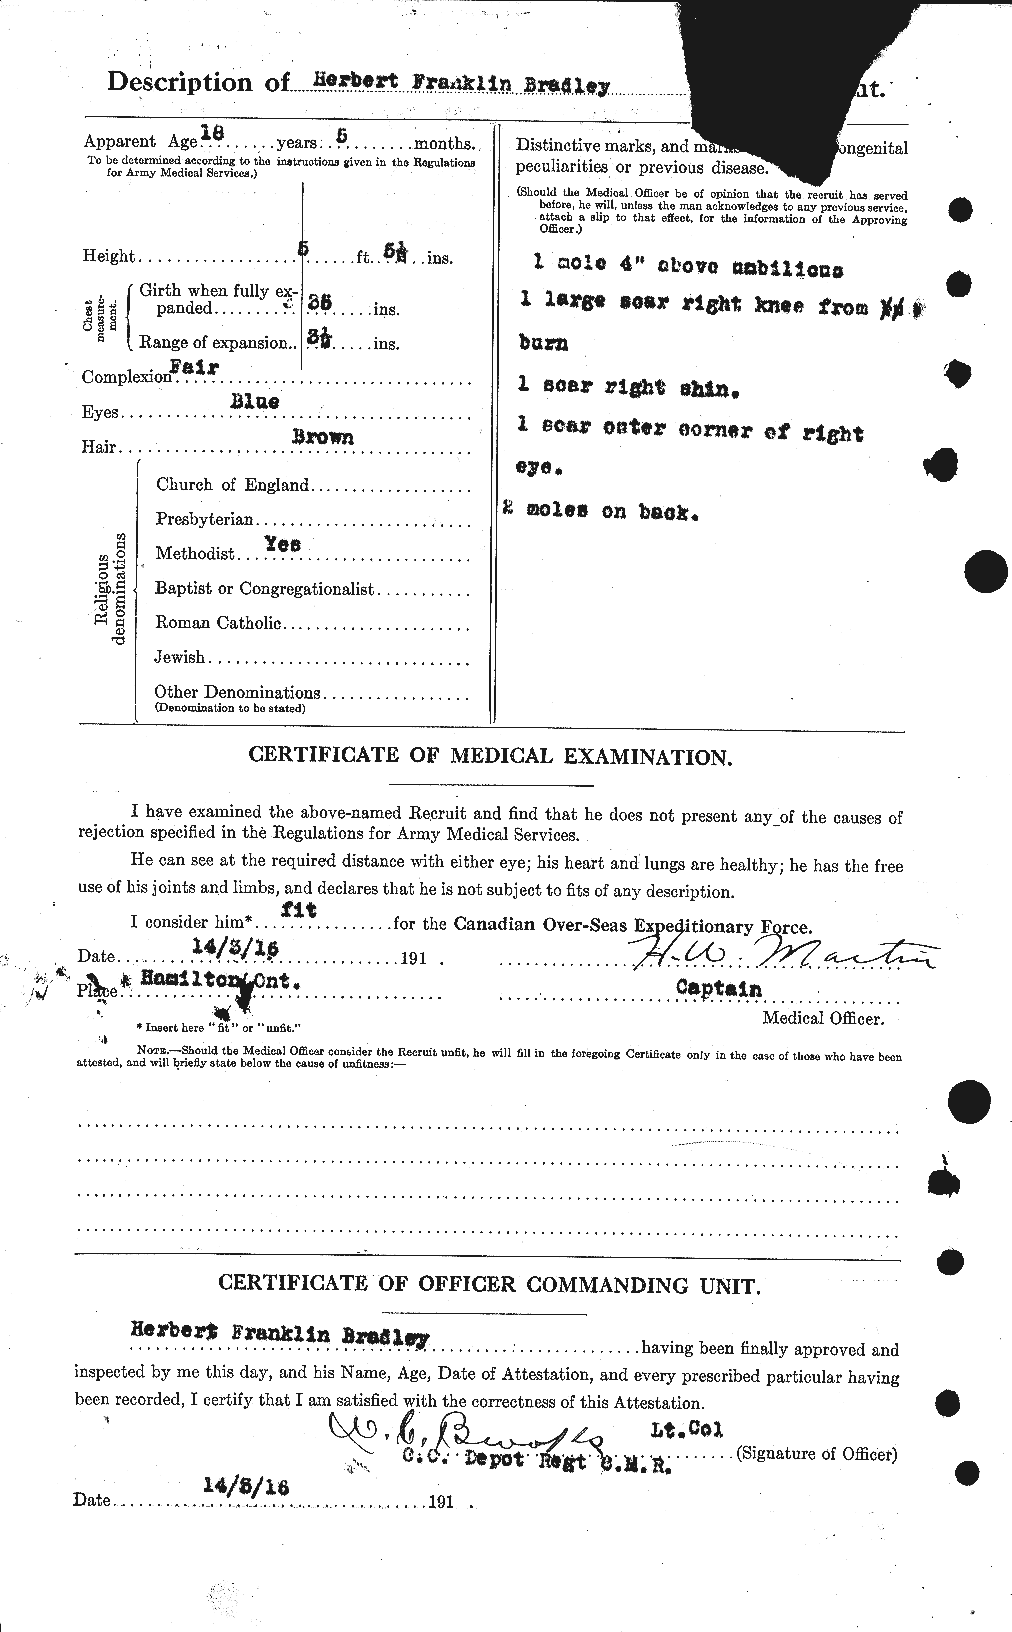 Personnel Records of the First World War - CEF 258436b